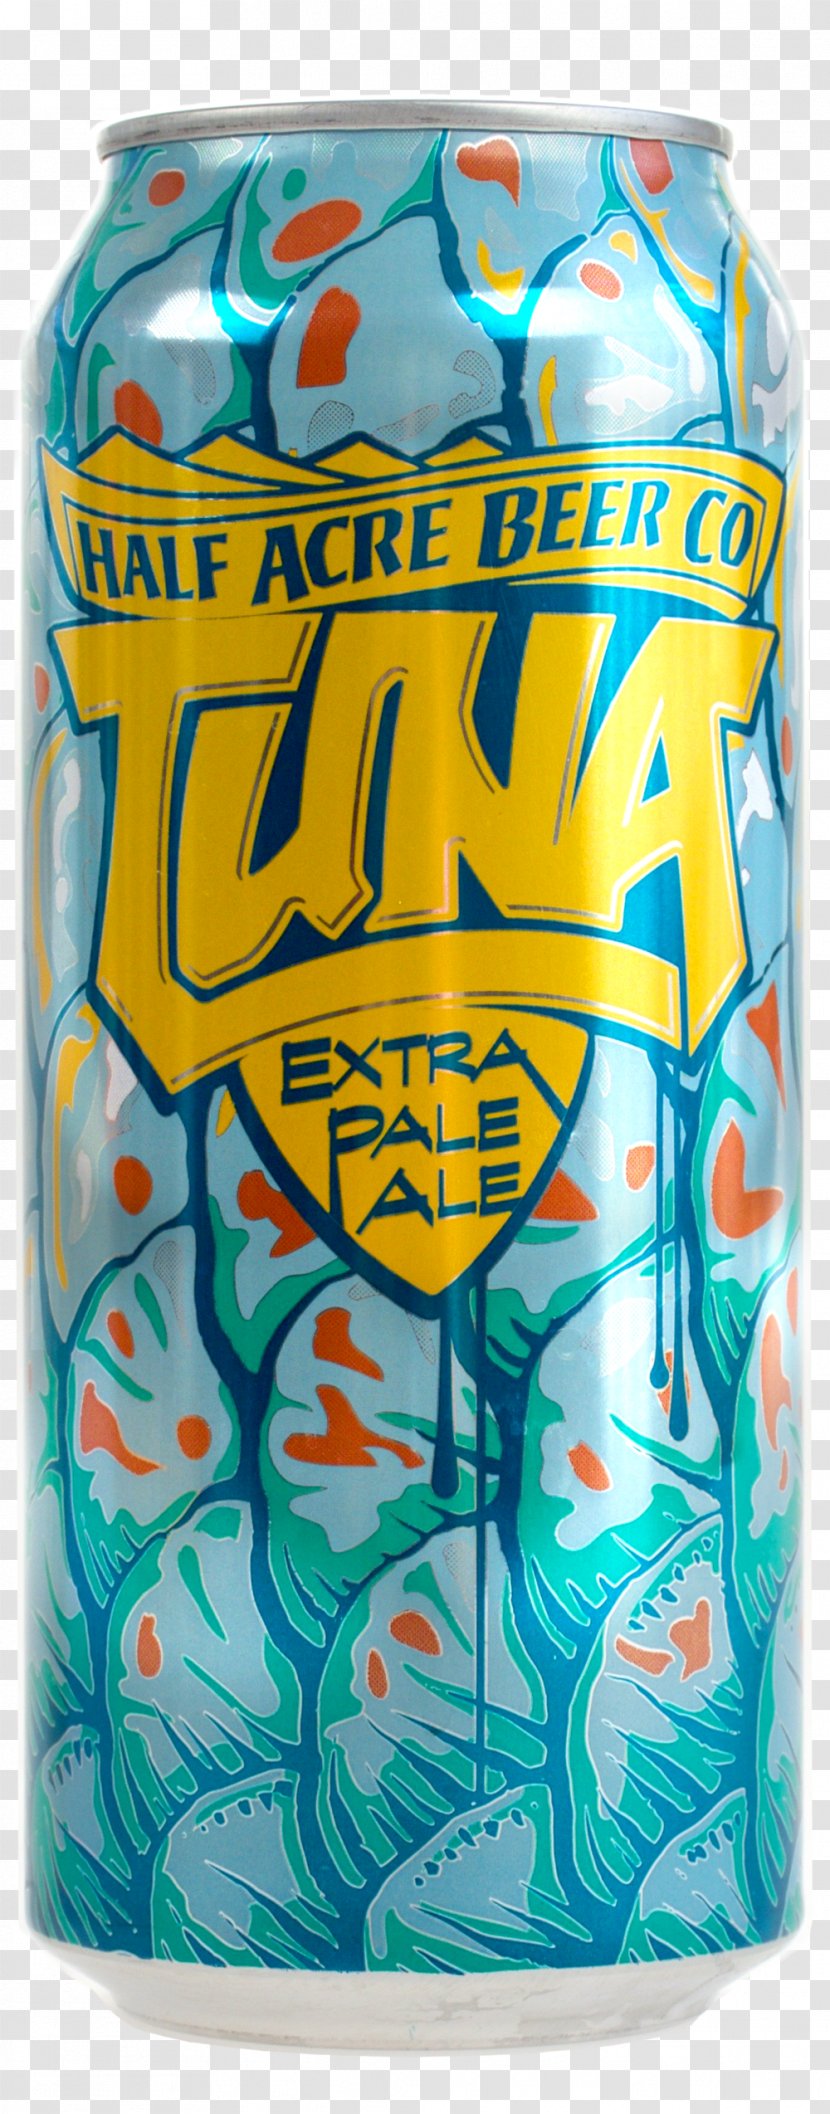 Half Acre Beer Company India Pale Ale Pilsner Juice - Goose Island Brewery - Tuna Transparent PNG